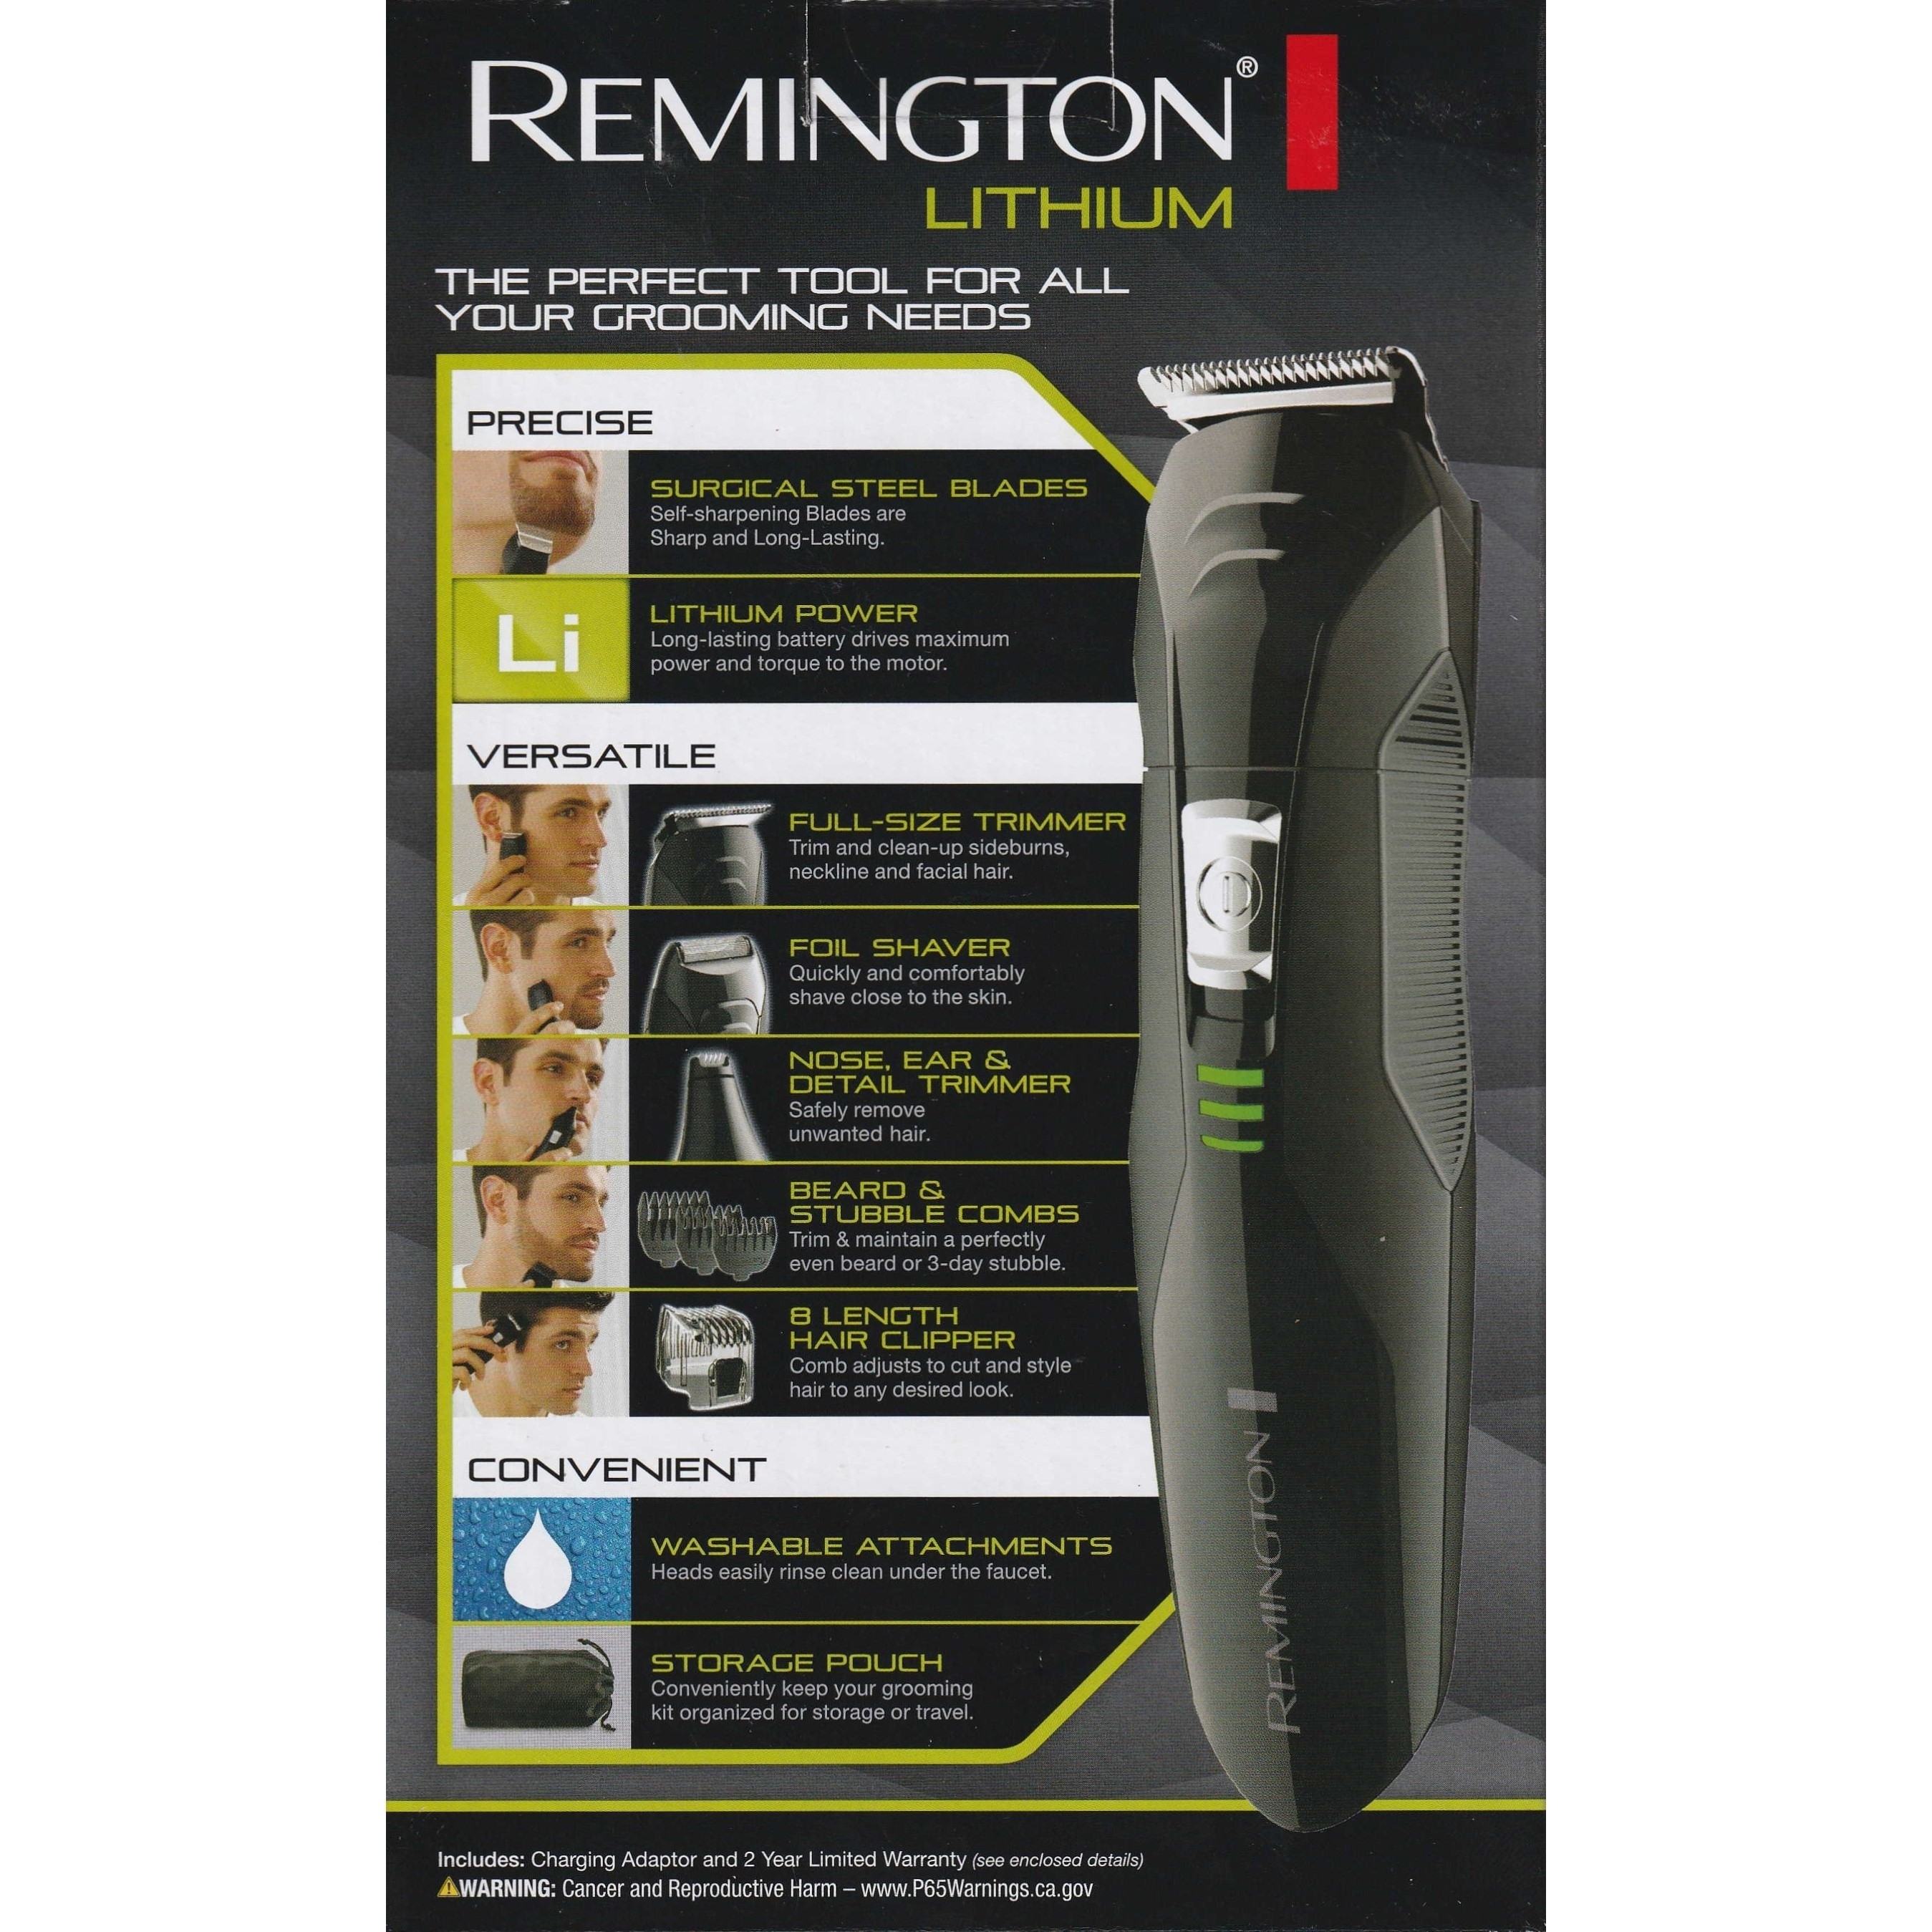 Remington All-In-One Grooming Kit, Black, PG6025 - image 2 of 3